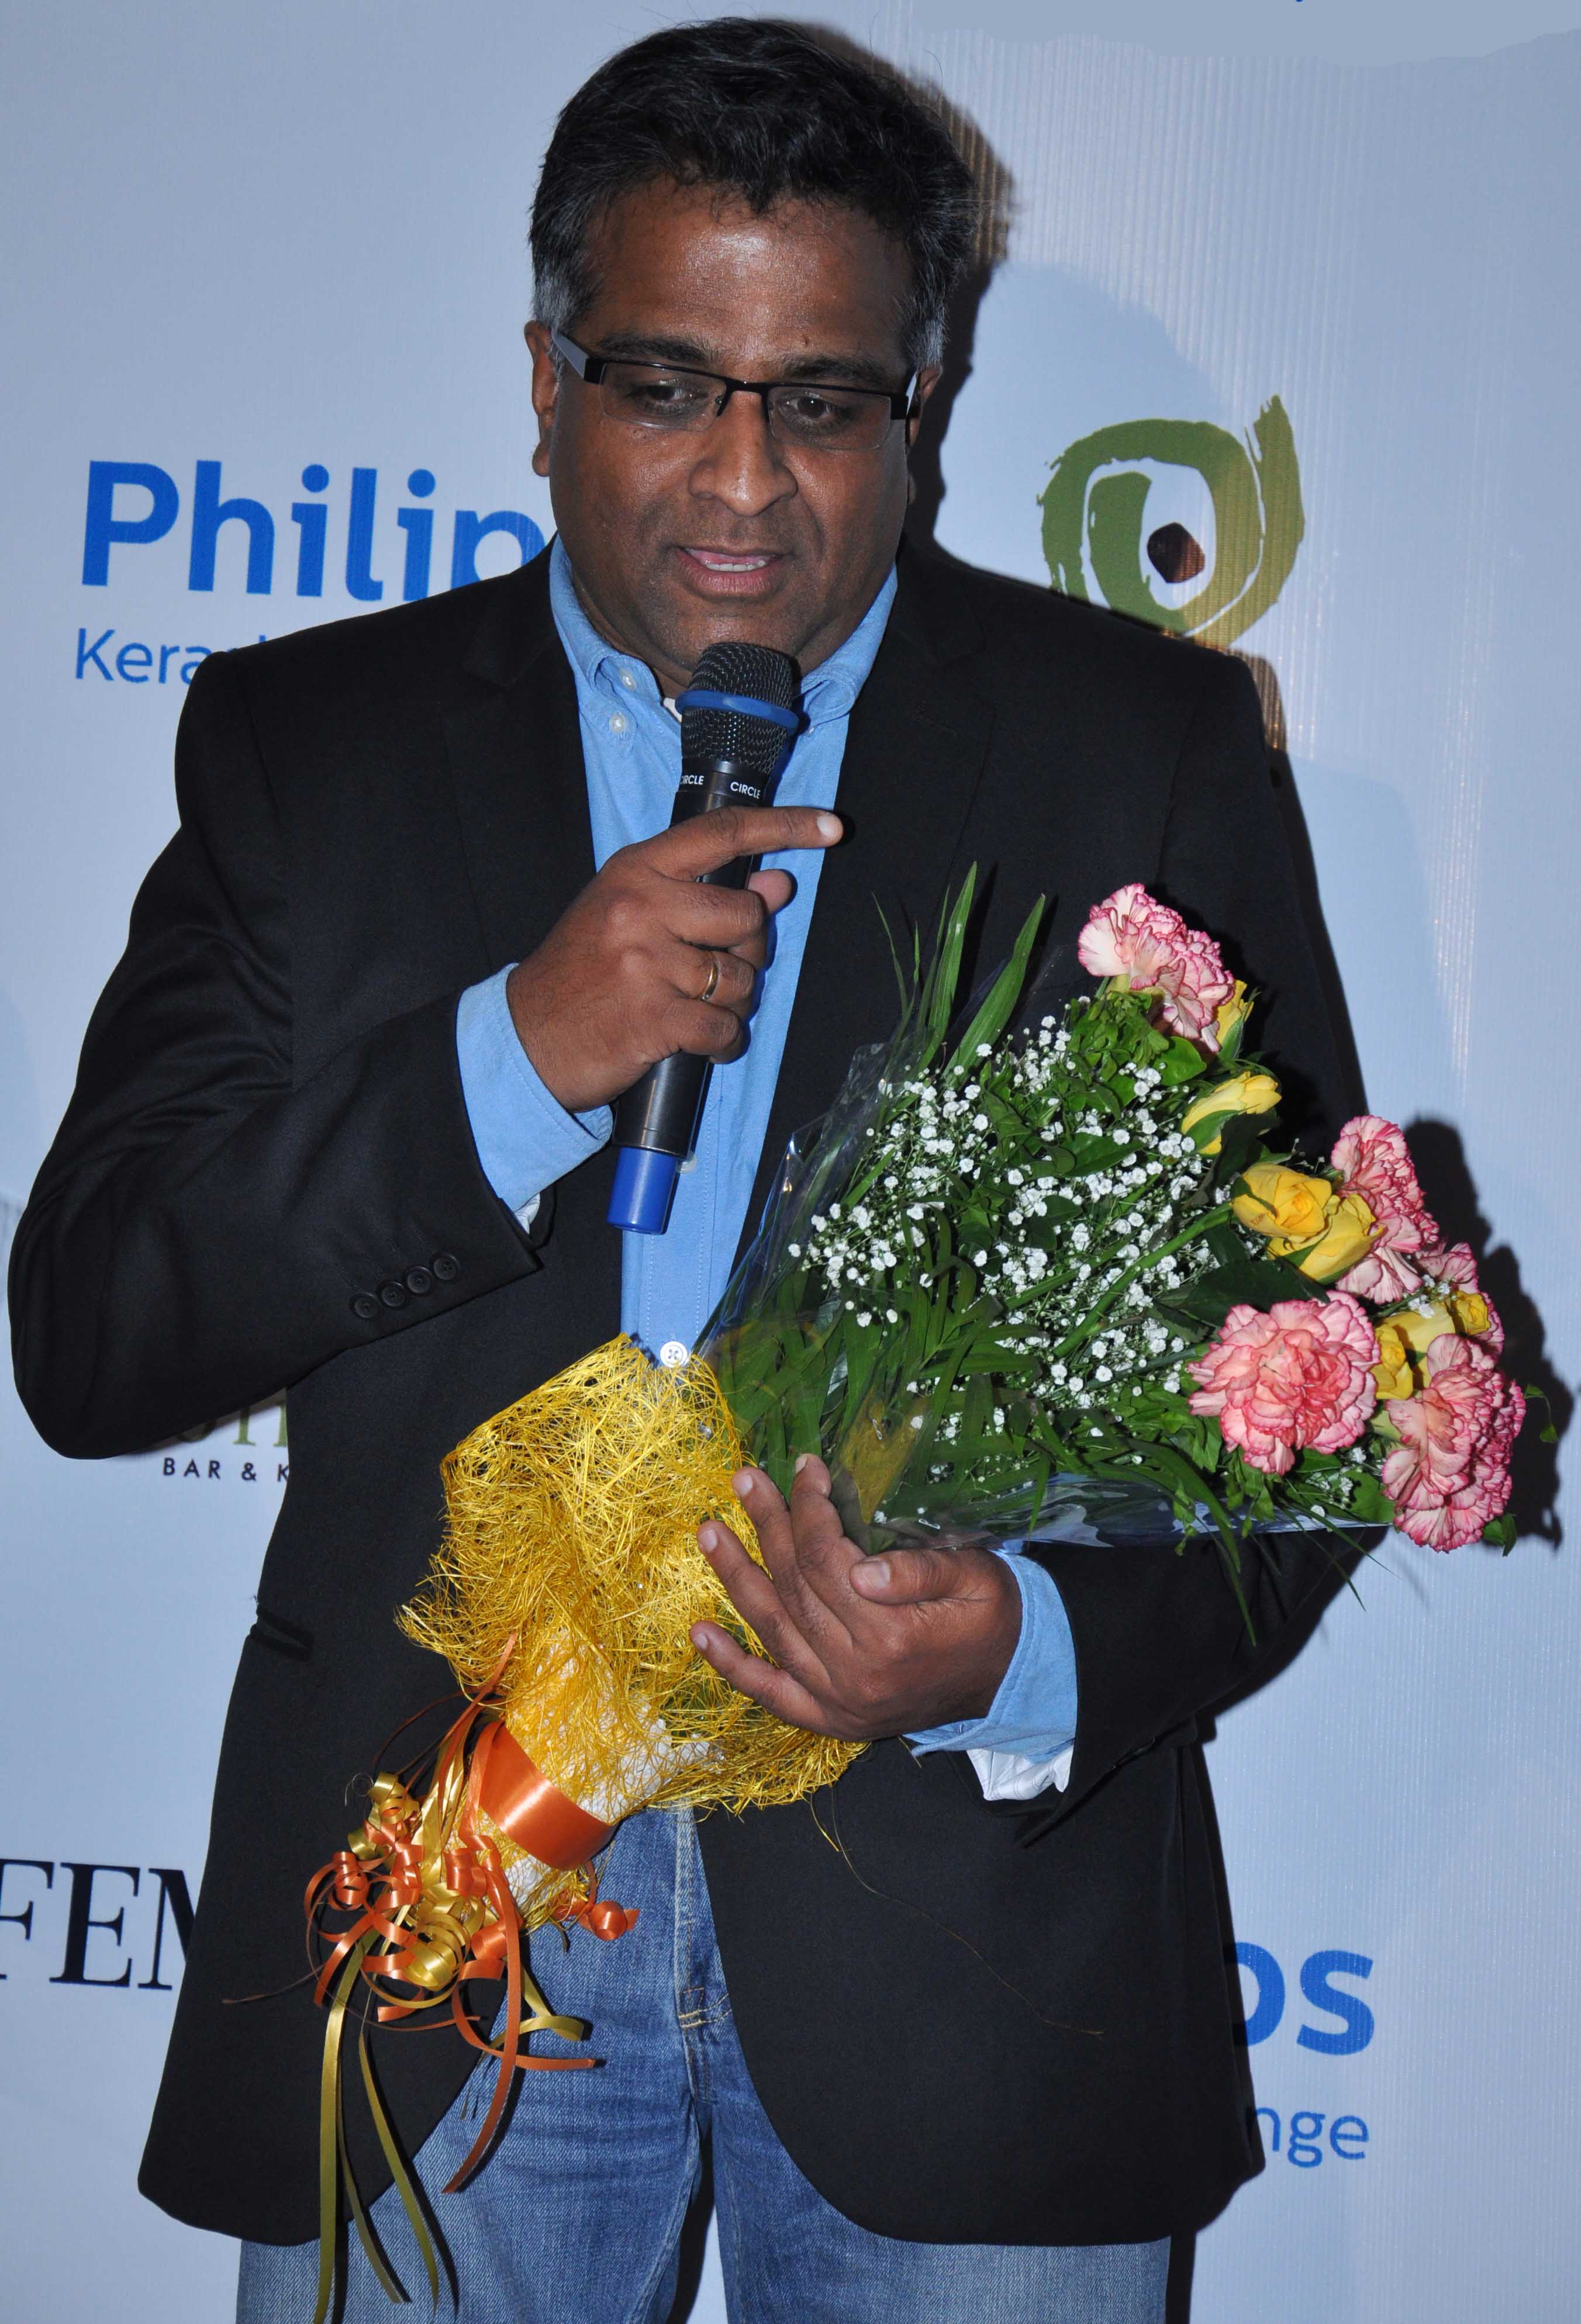 Mr. A D A Ratnam (President, Consumer Lifestyle, Philips India) at the cover launch of Feminaas 55th Anniversary issue at Guppy by Olive.